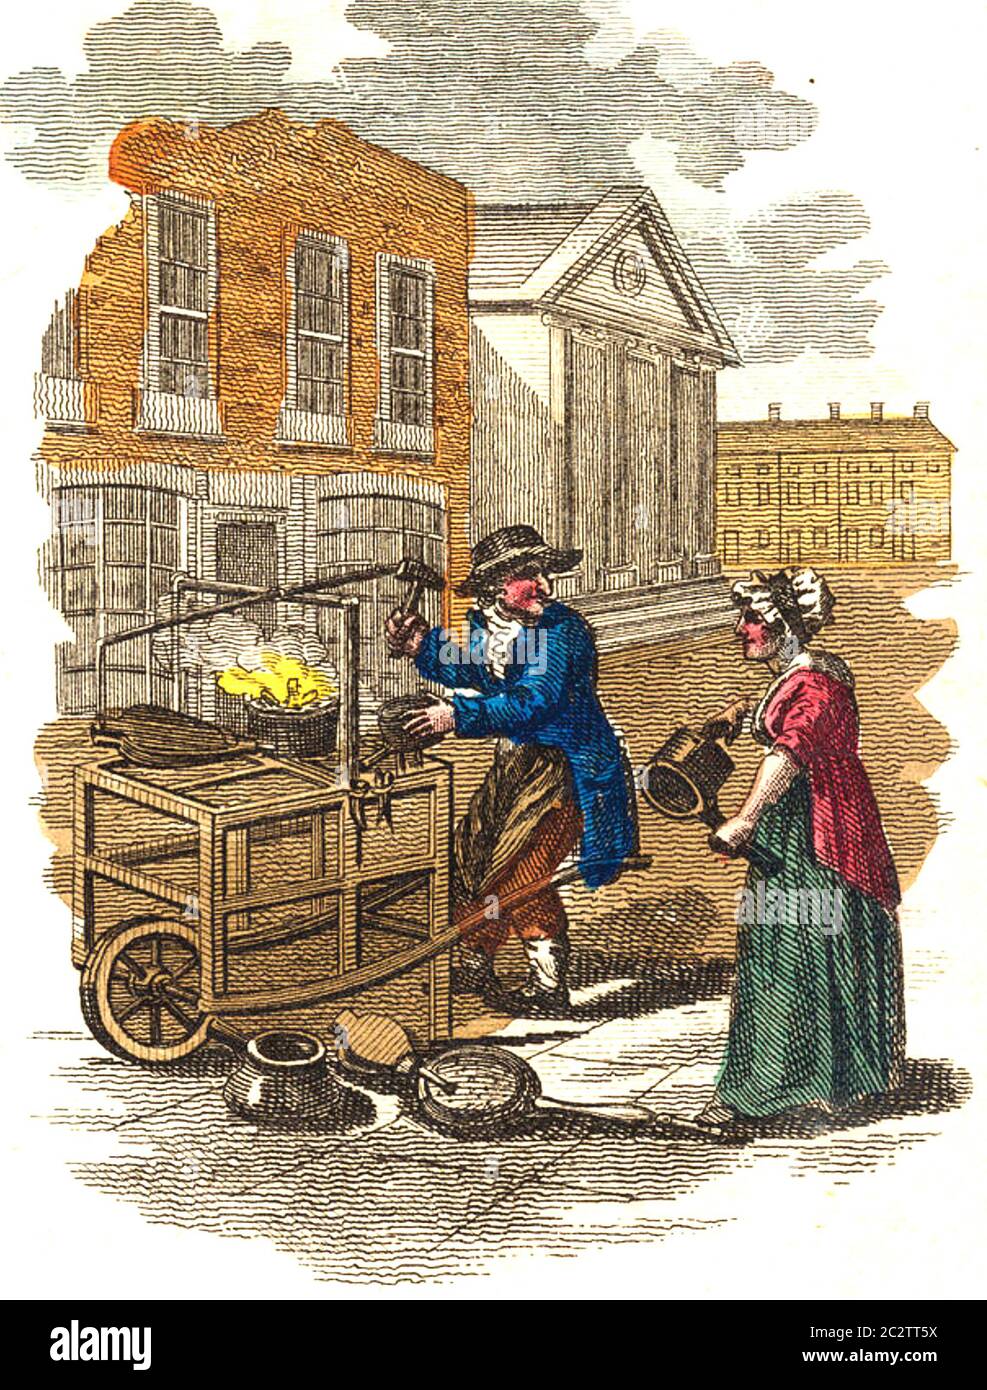 TINKER at work in an 1805 print. Stock Photo